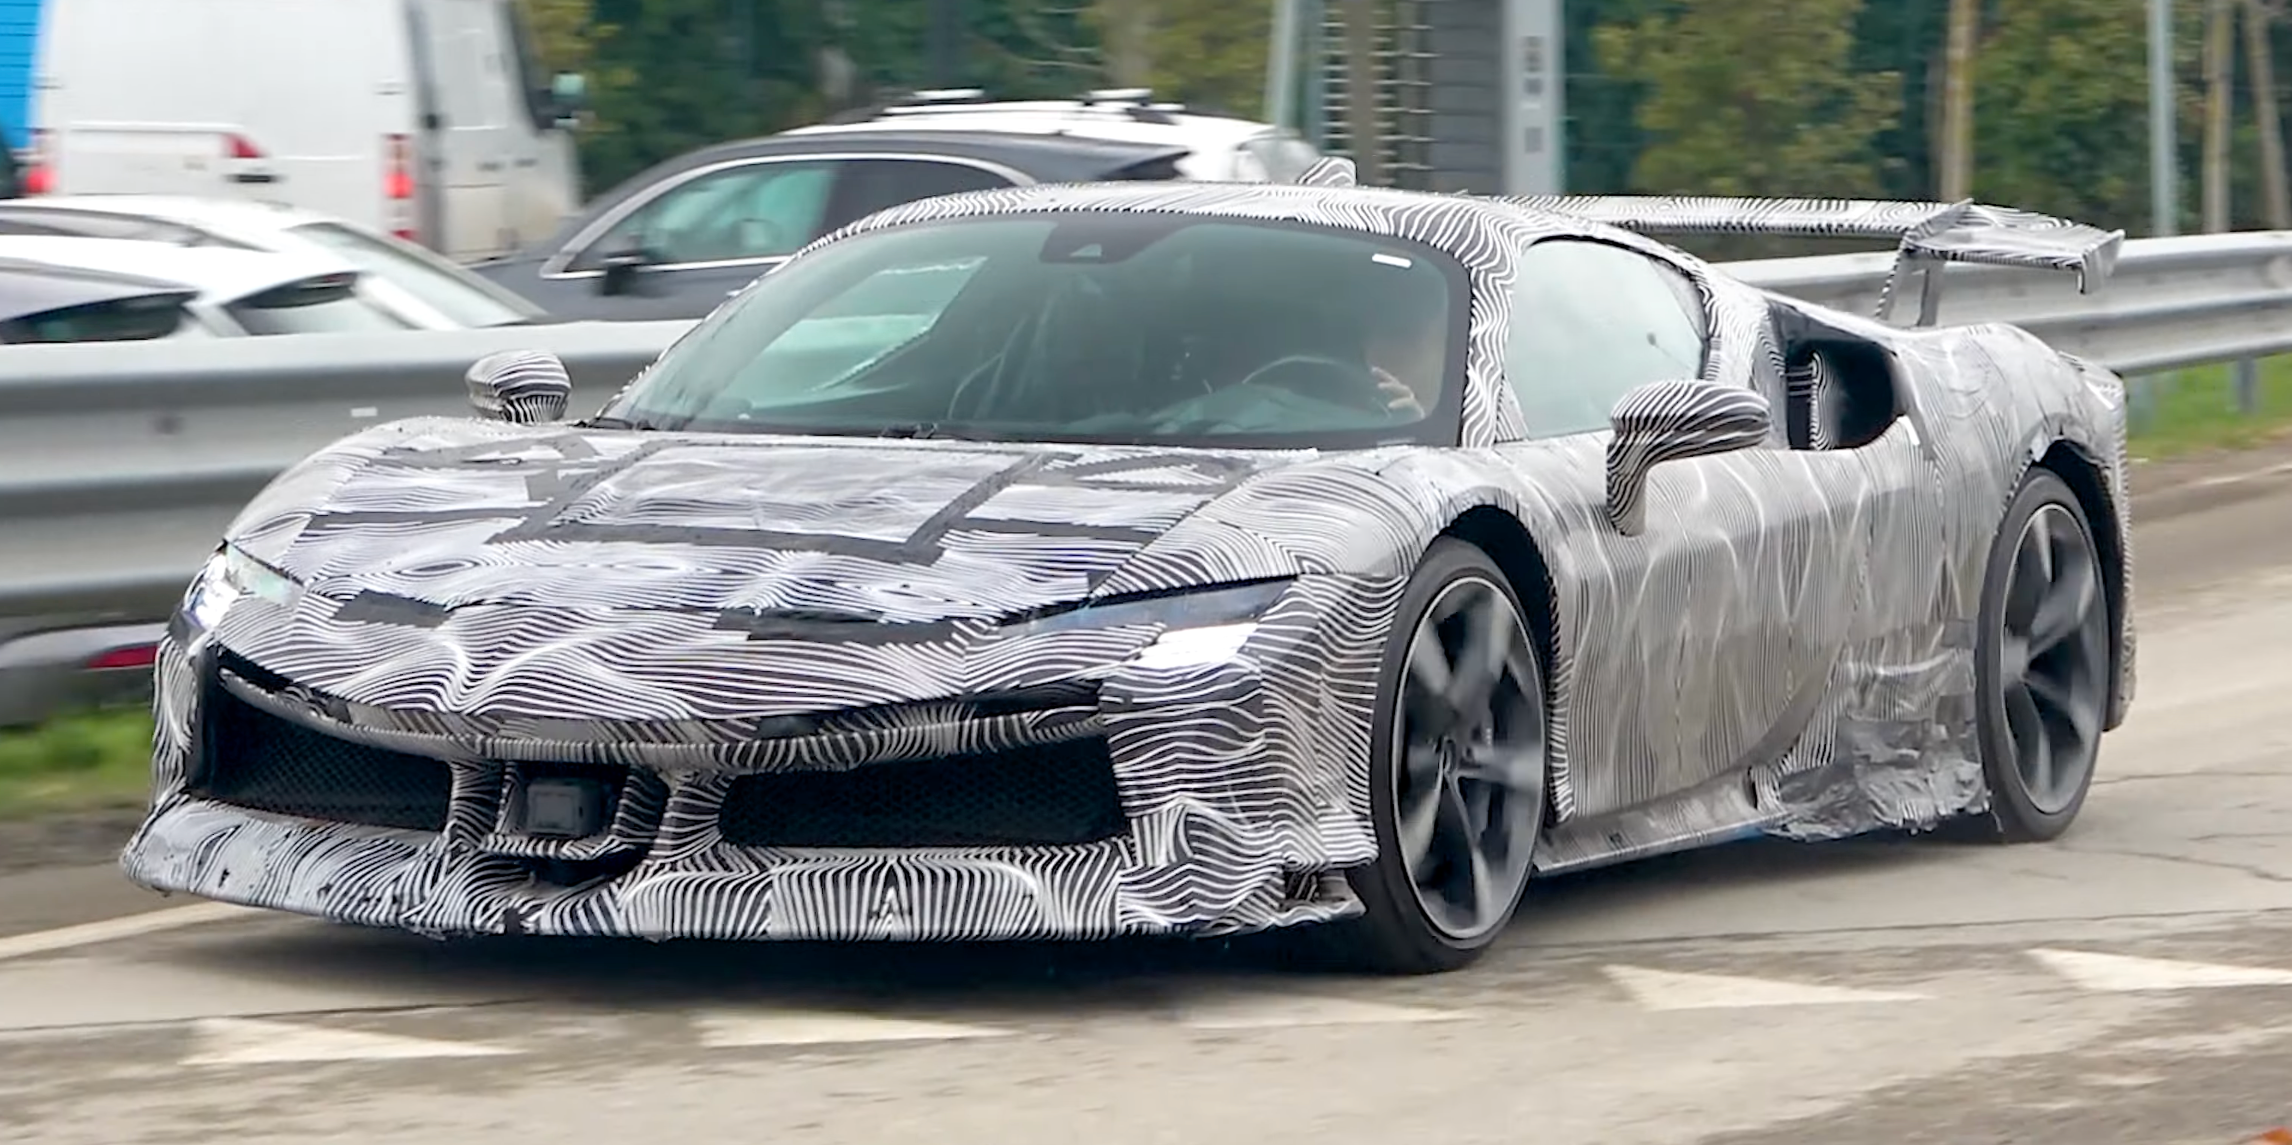 Something's Going on With this Extreme Ferrari SF90 Prototype